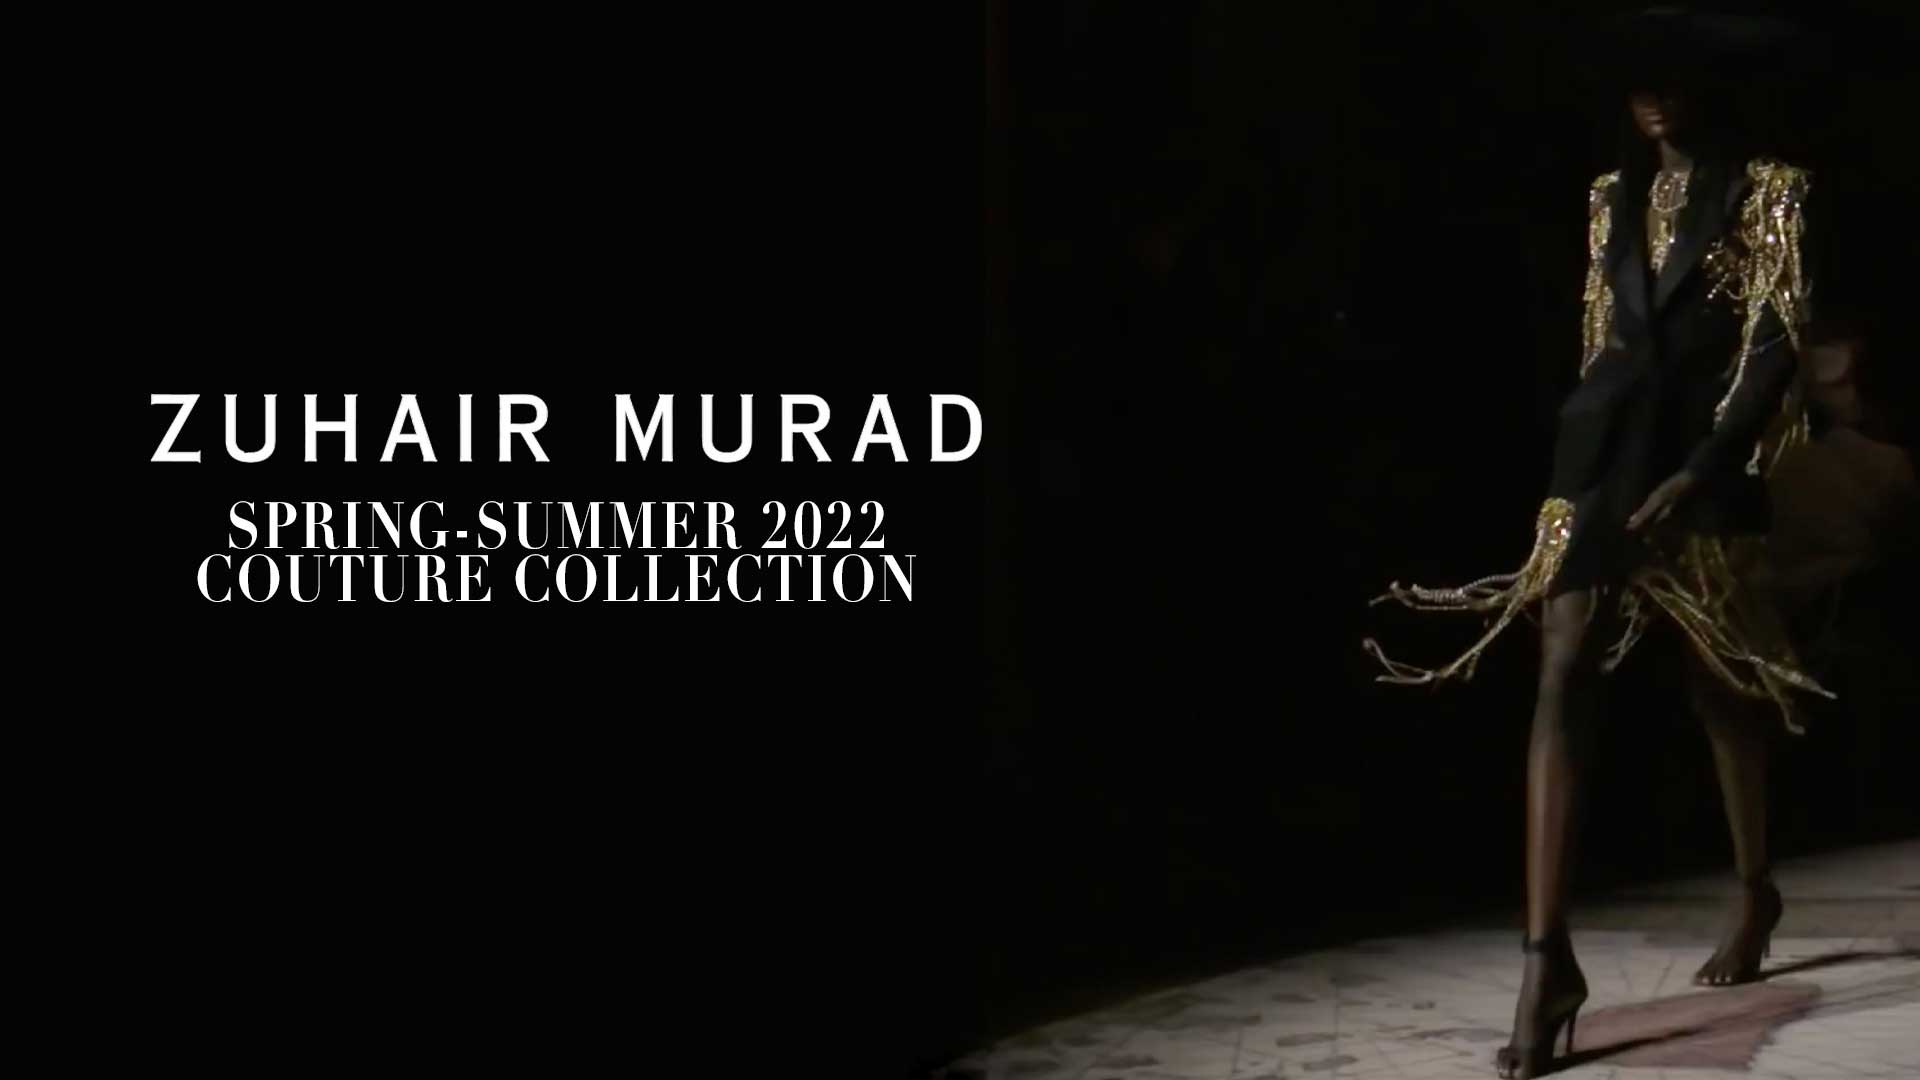 SPRING-SUMMER 2022 ZUHAIR MURAD COUTURE COLLECTION